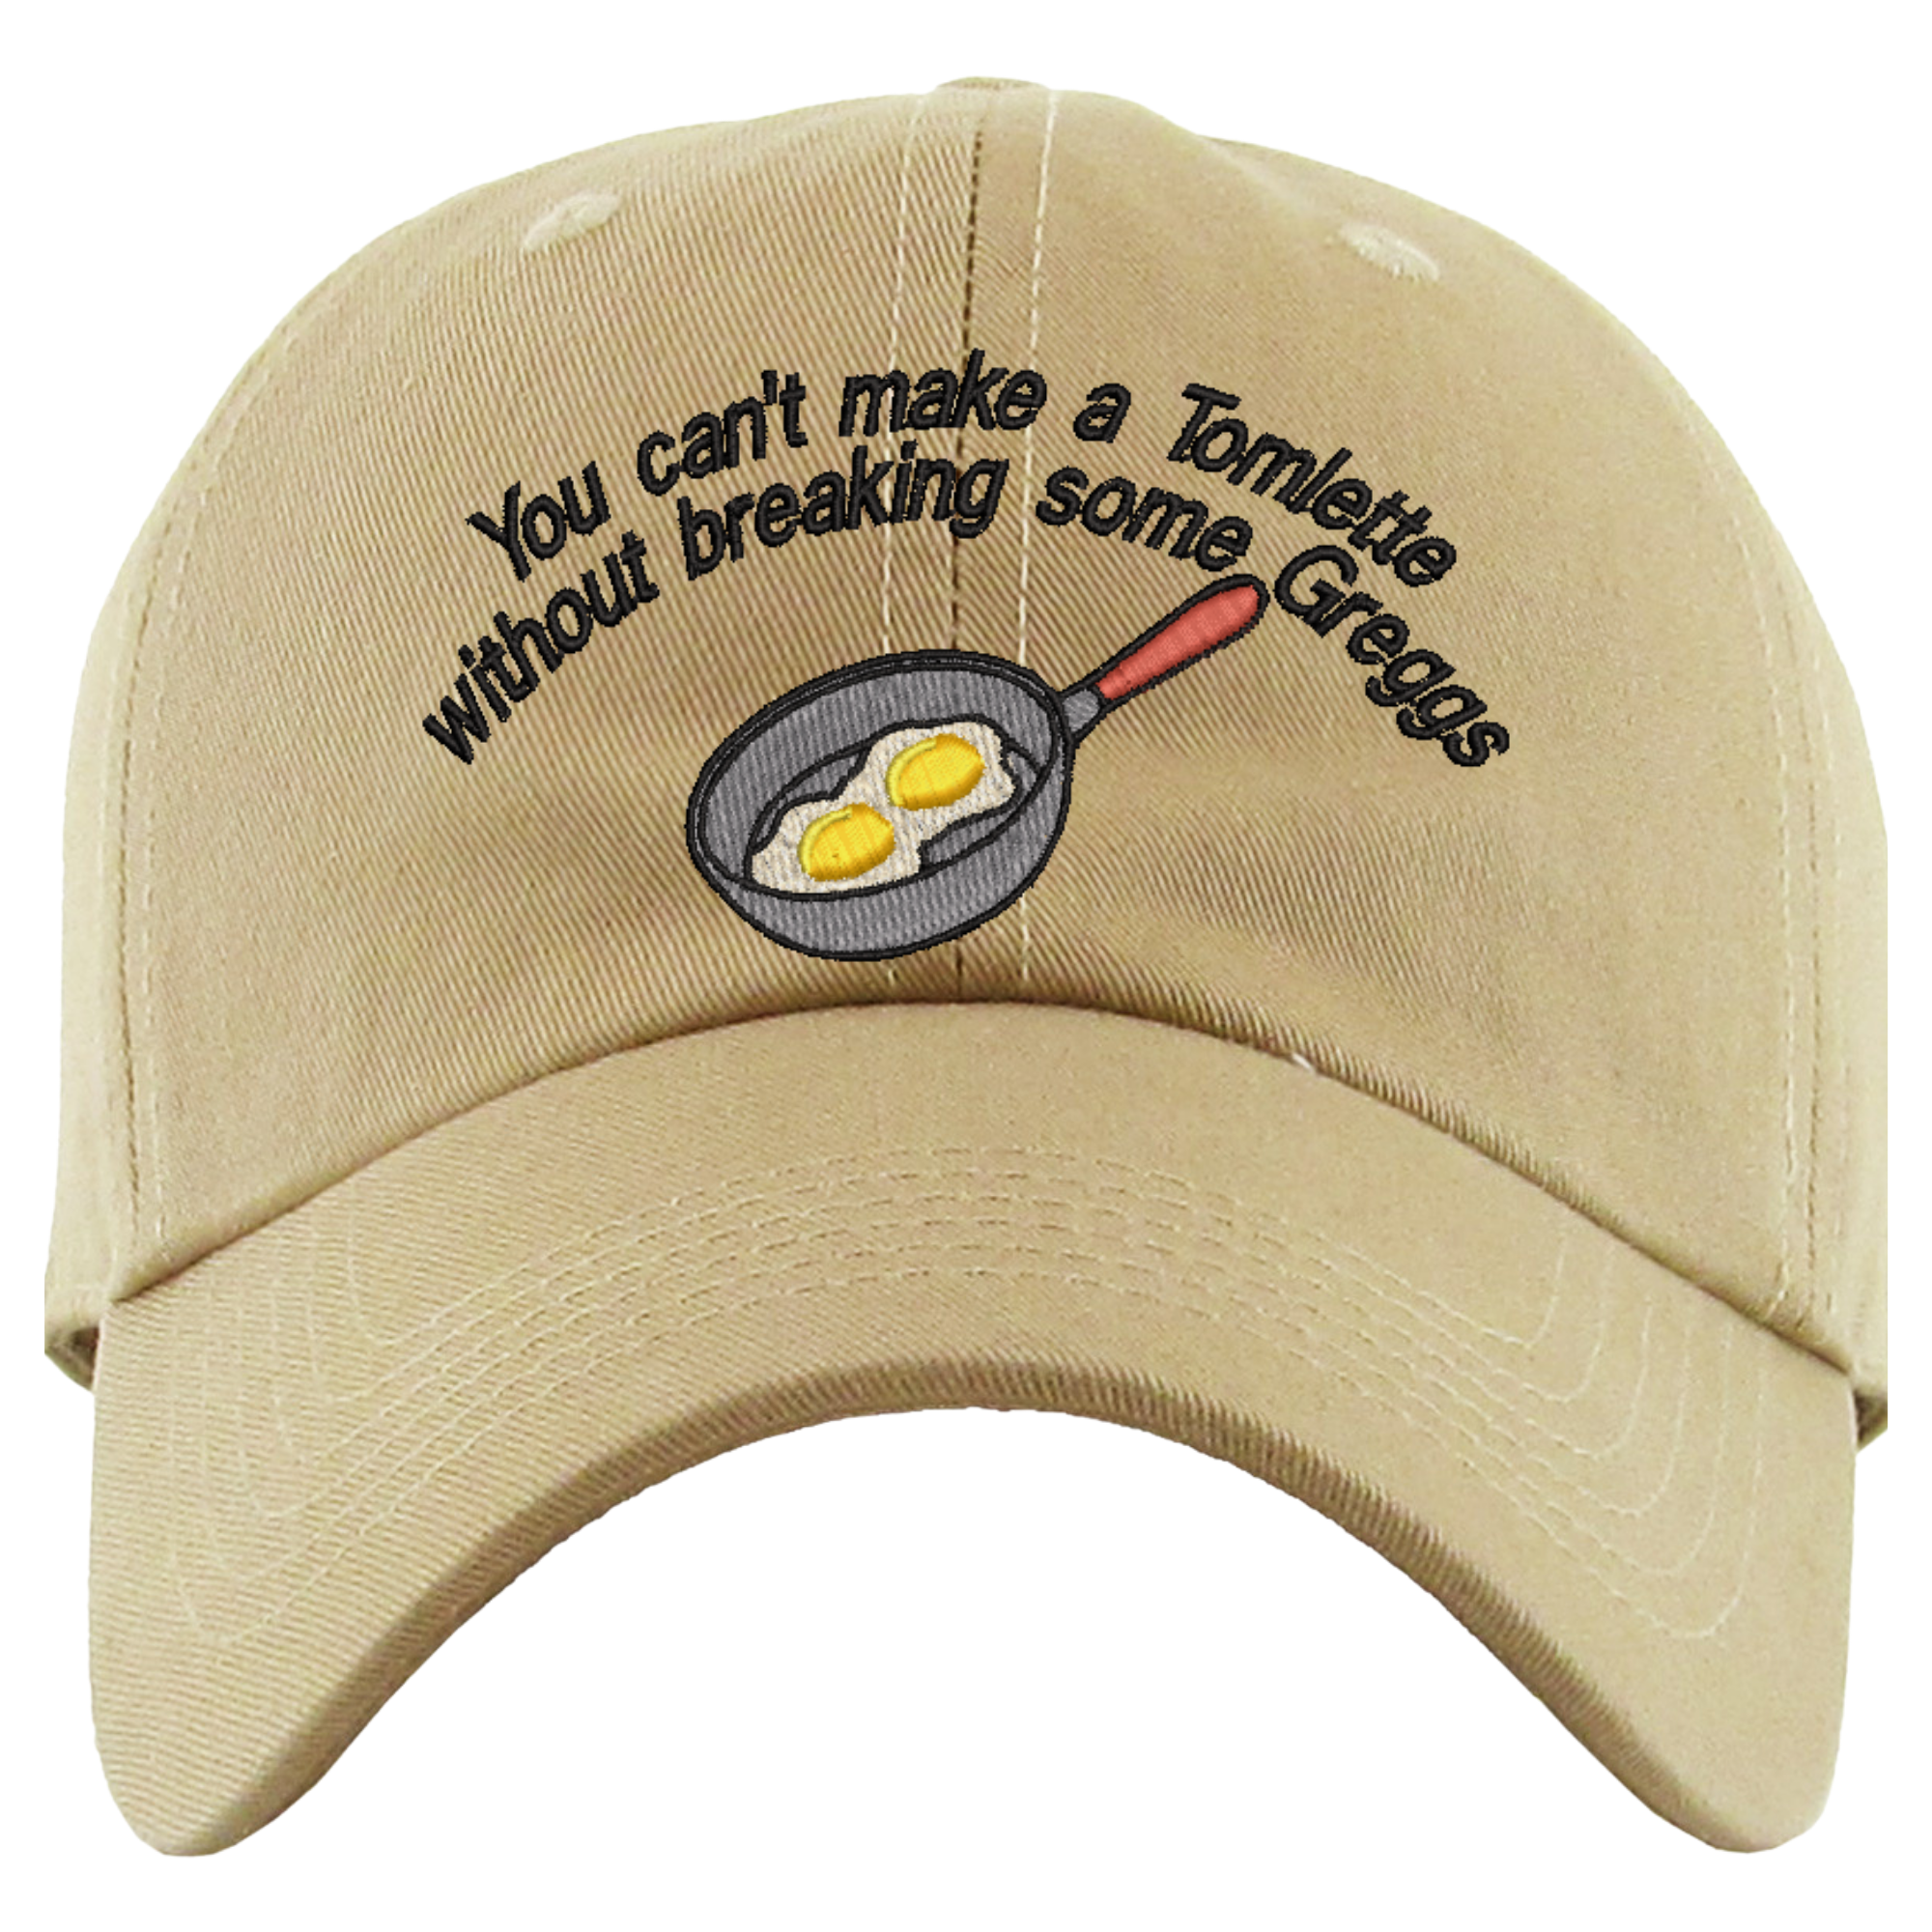 You Can't Make a Tomlette Without Breaking Some Greggs Succession Quote Tom Wombsgans Embroidered Black Dad Hat, One Size Fits All